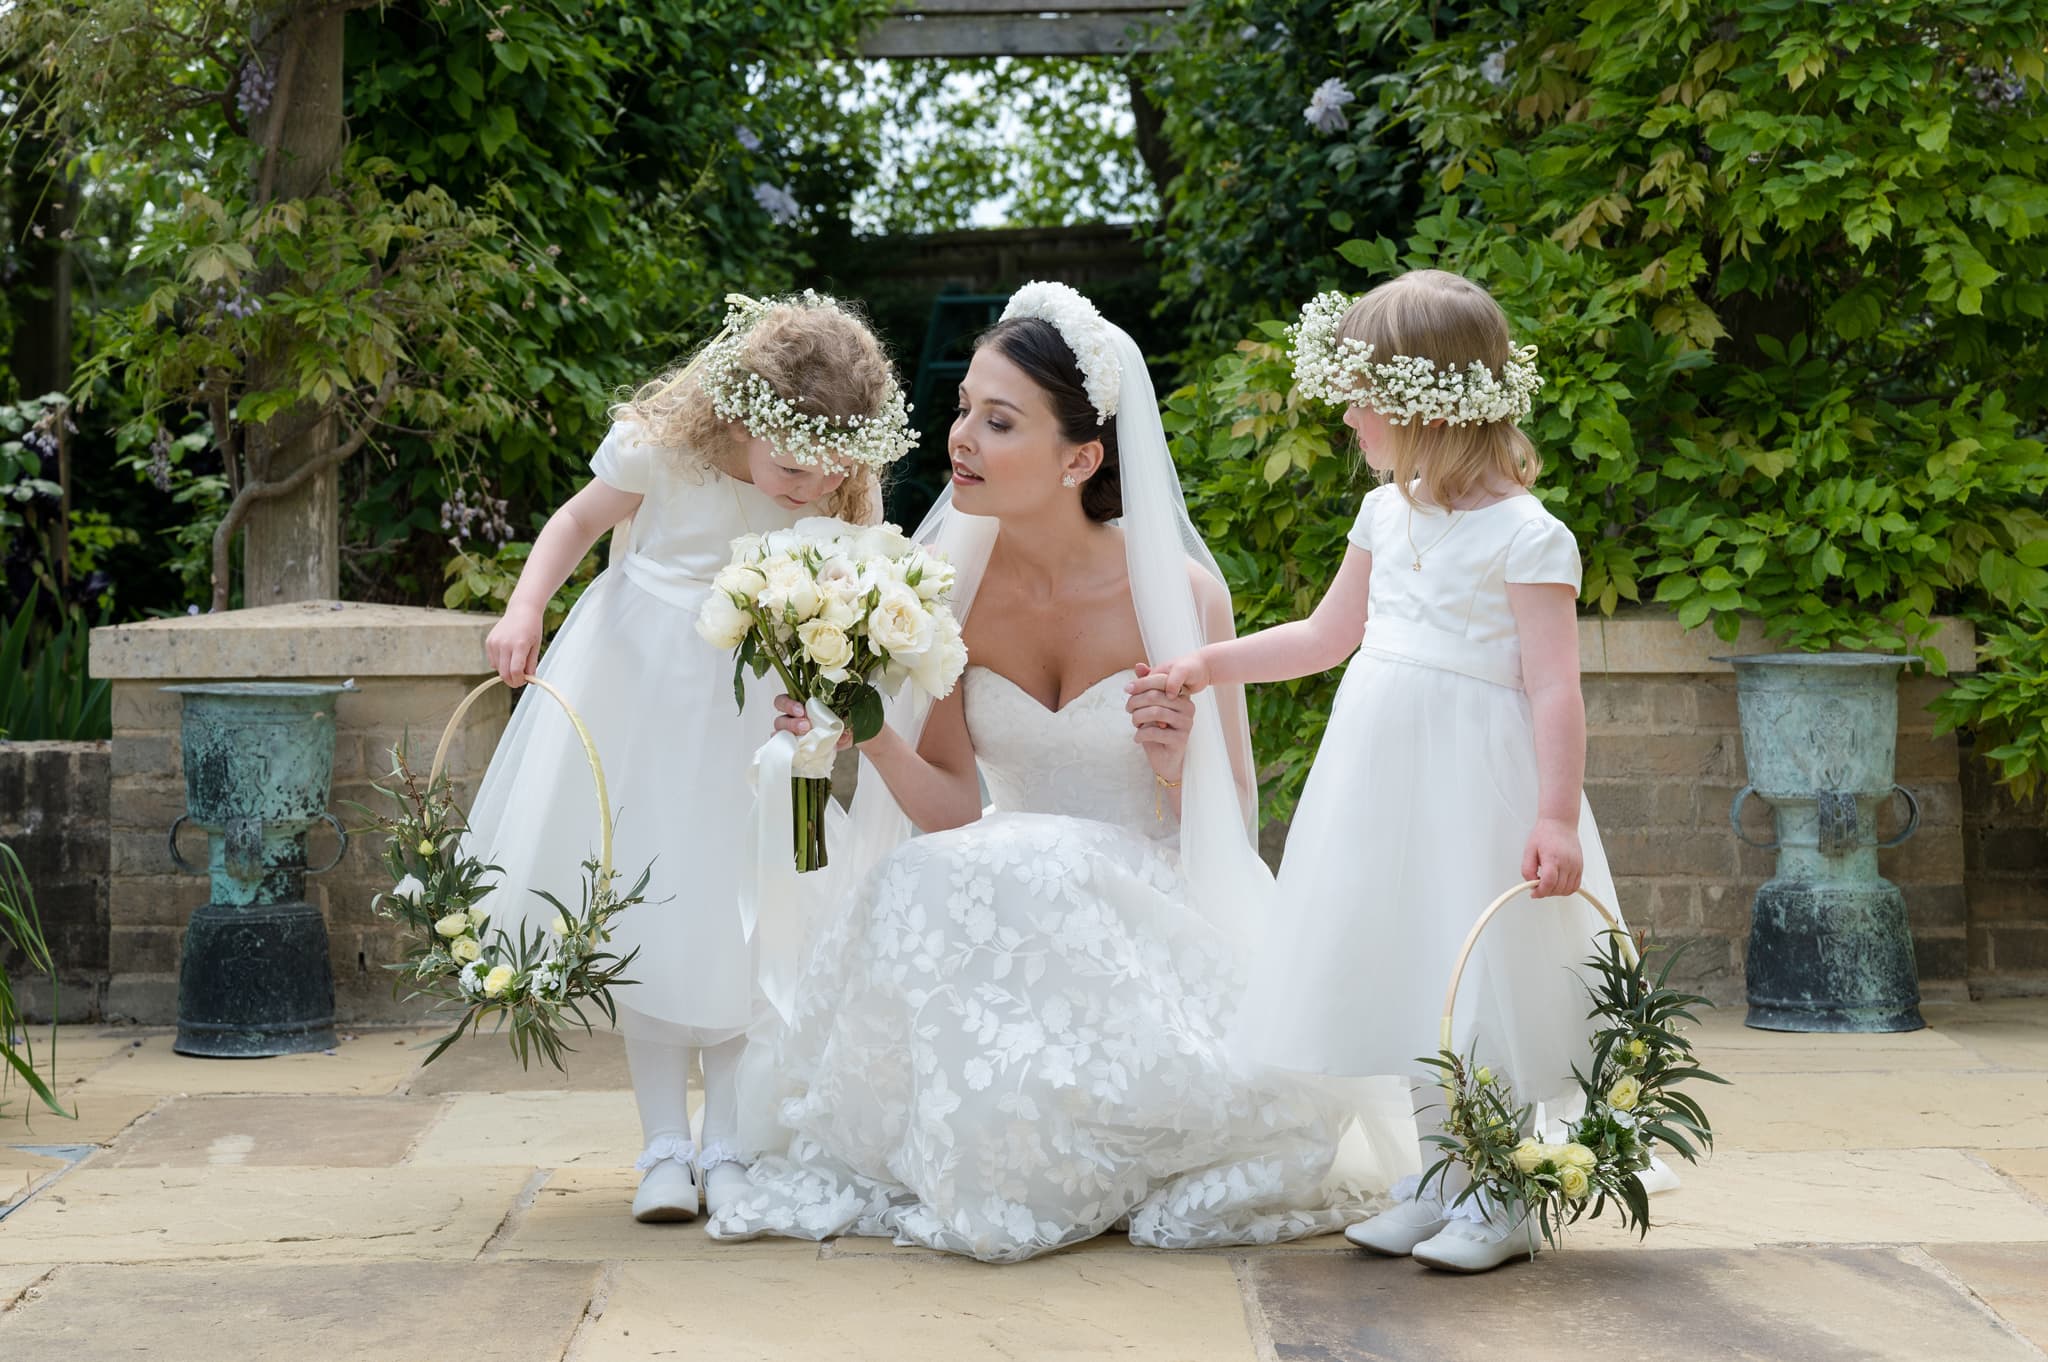 Bride holding out her bouquet of white roses for her flower girl to smell